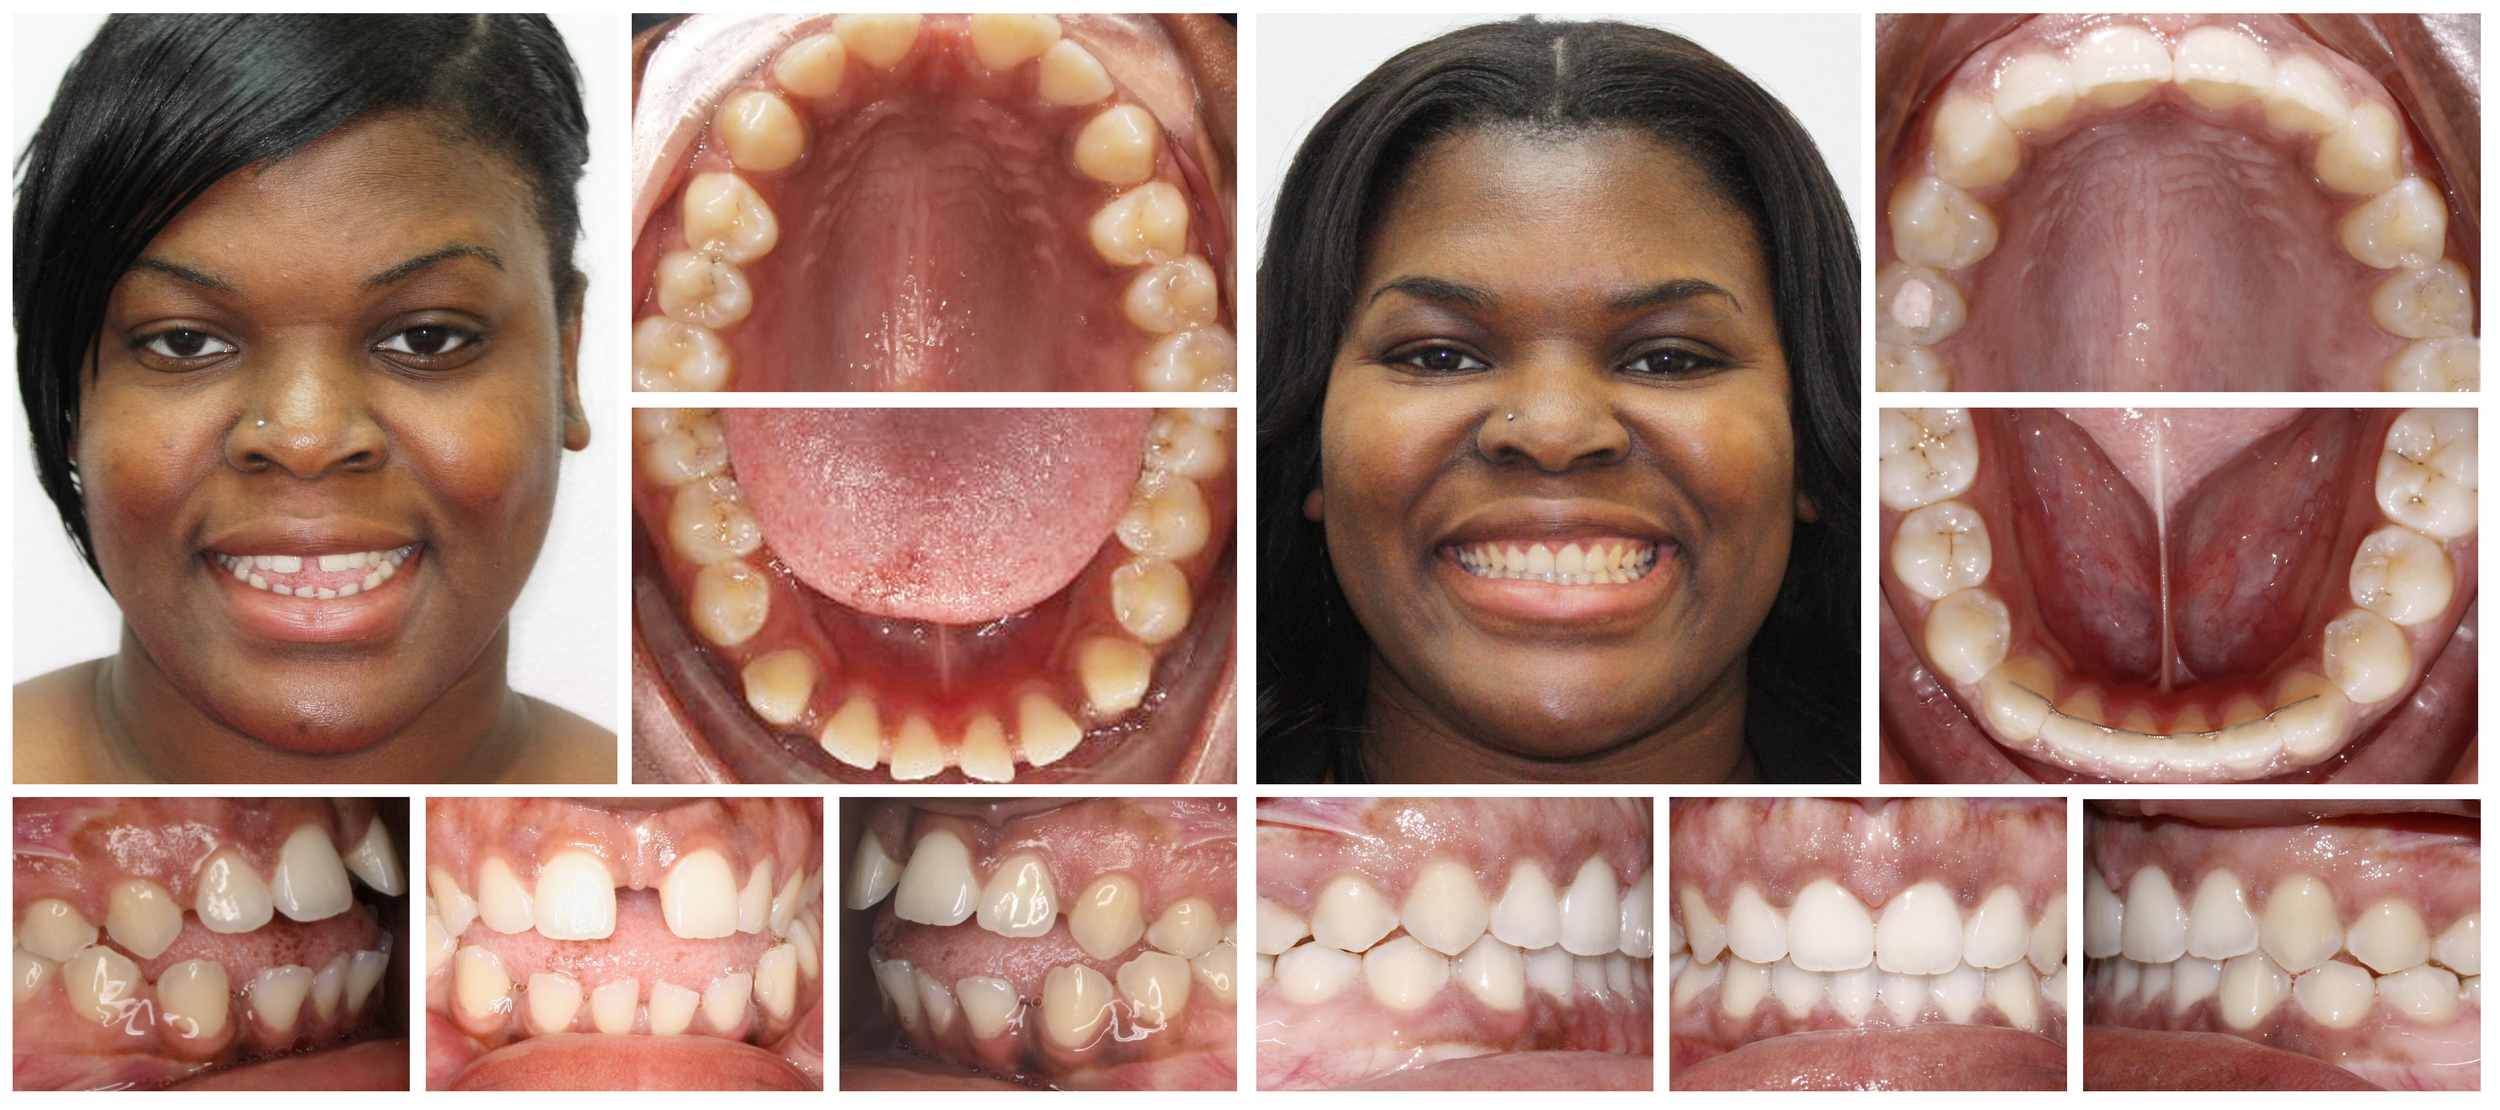 Woman 2 composite before & after Invisalign treatment